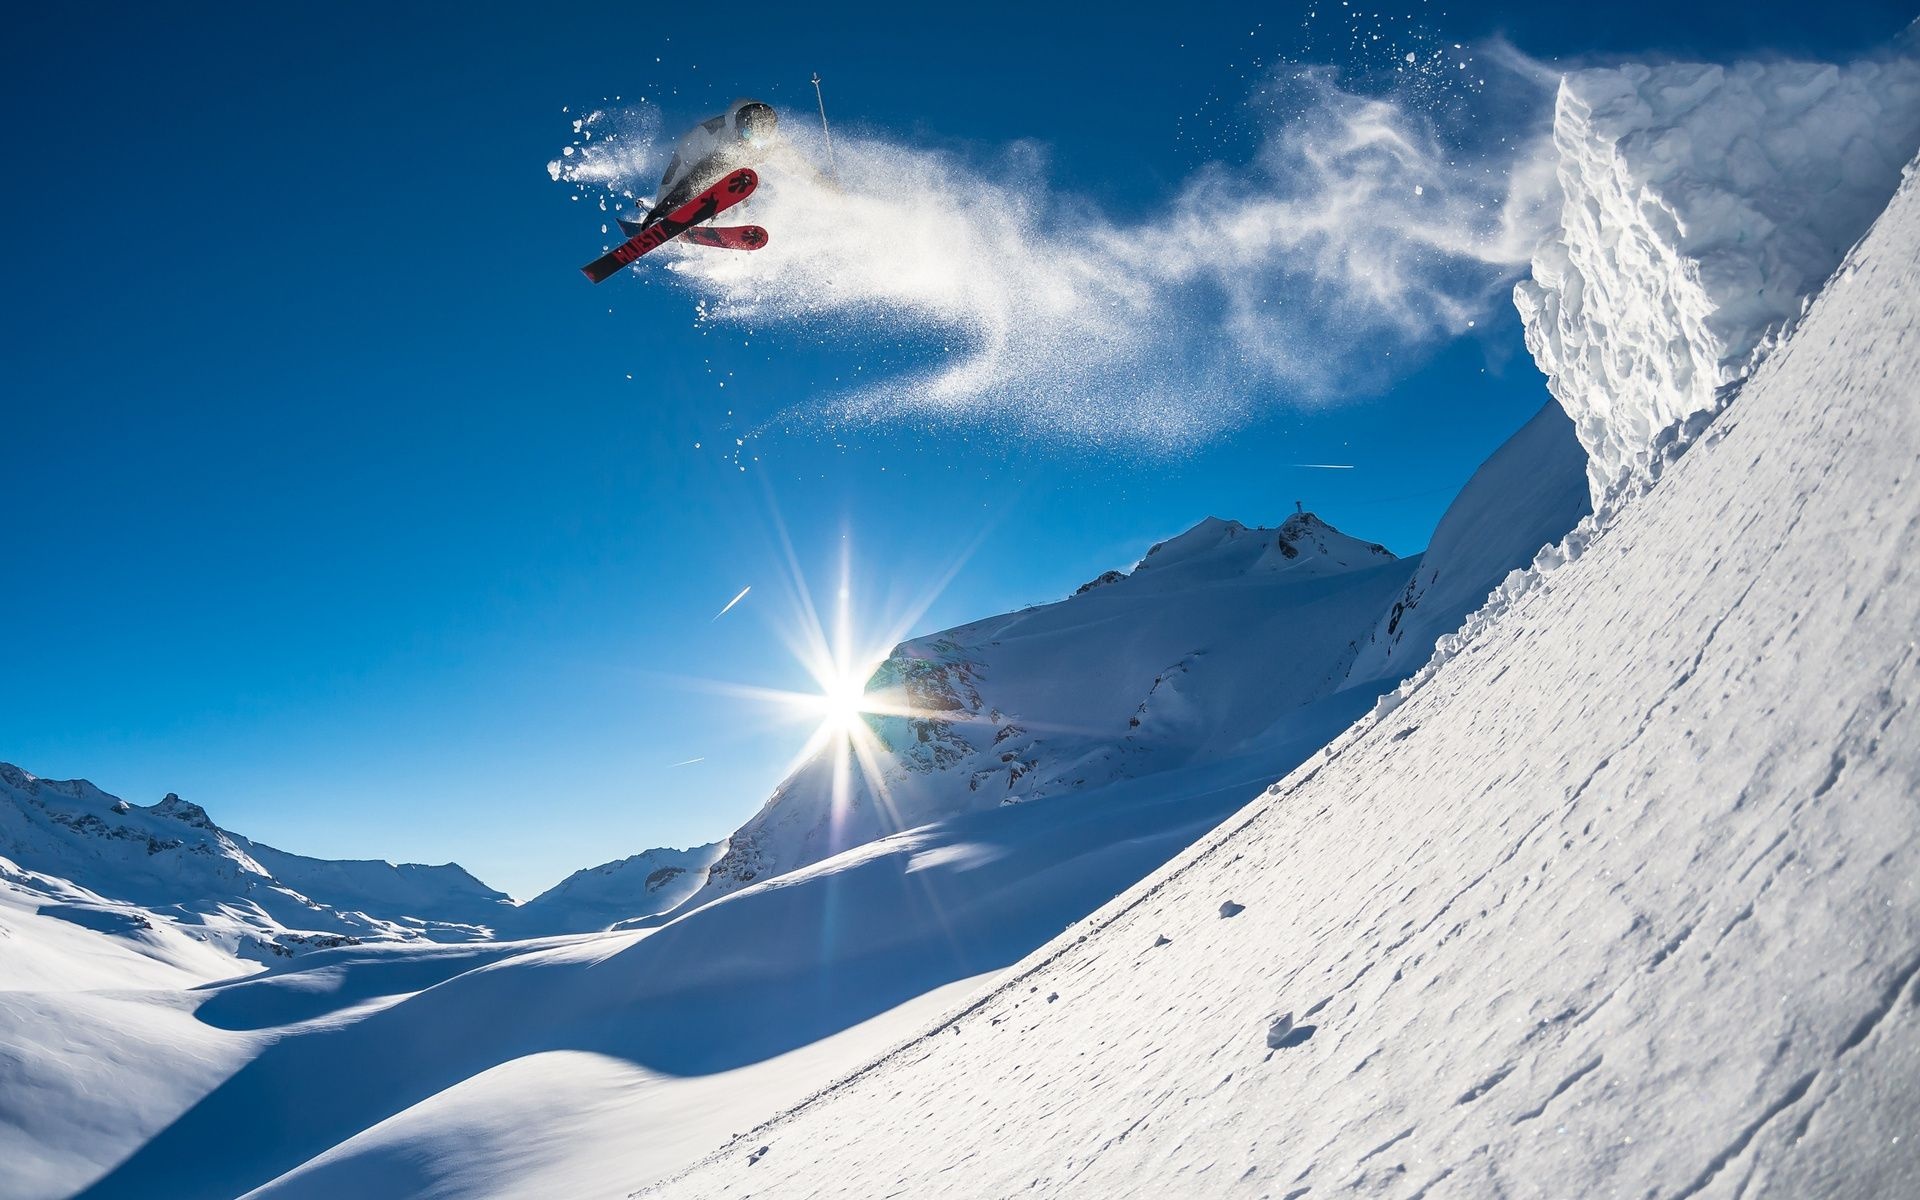 Skiing: Freestyle Skiing, Gliding on snow, Extreme winter sports, Ski jumping. 1920x1200 HD Background.